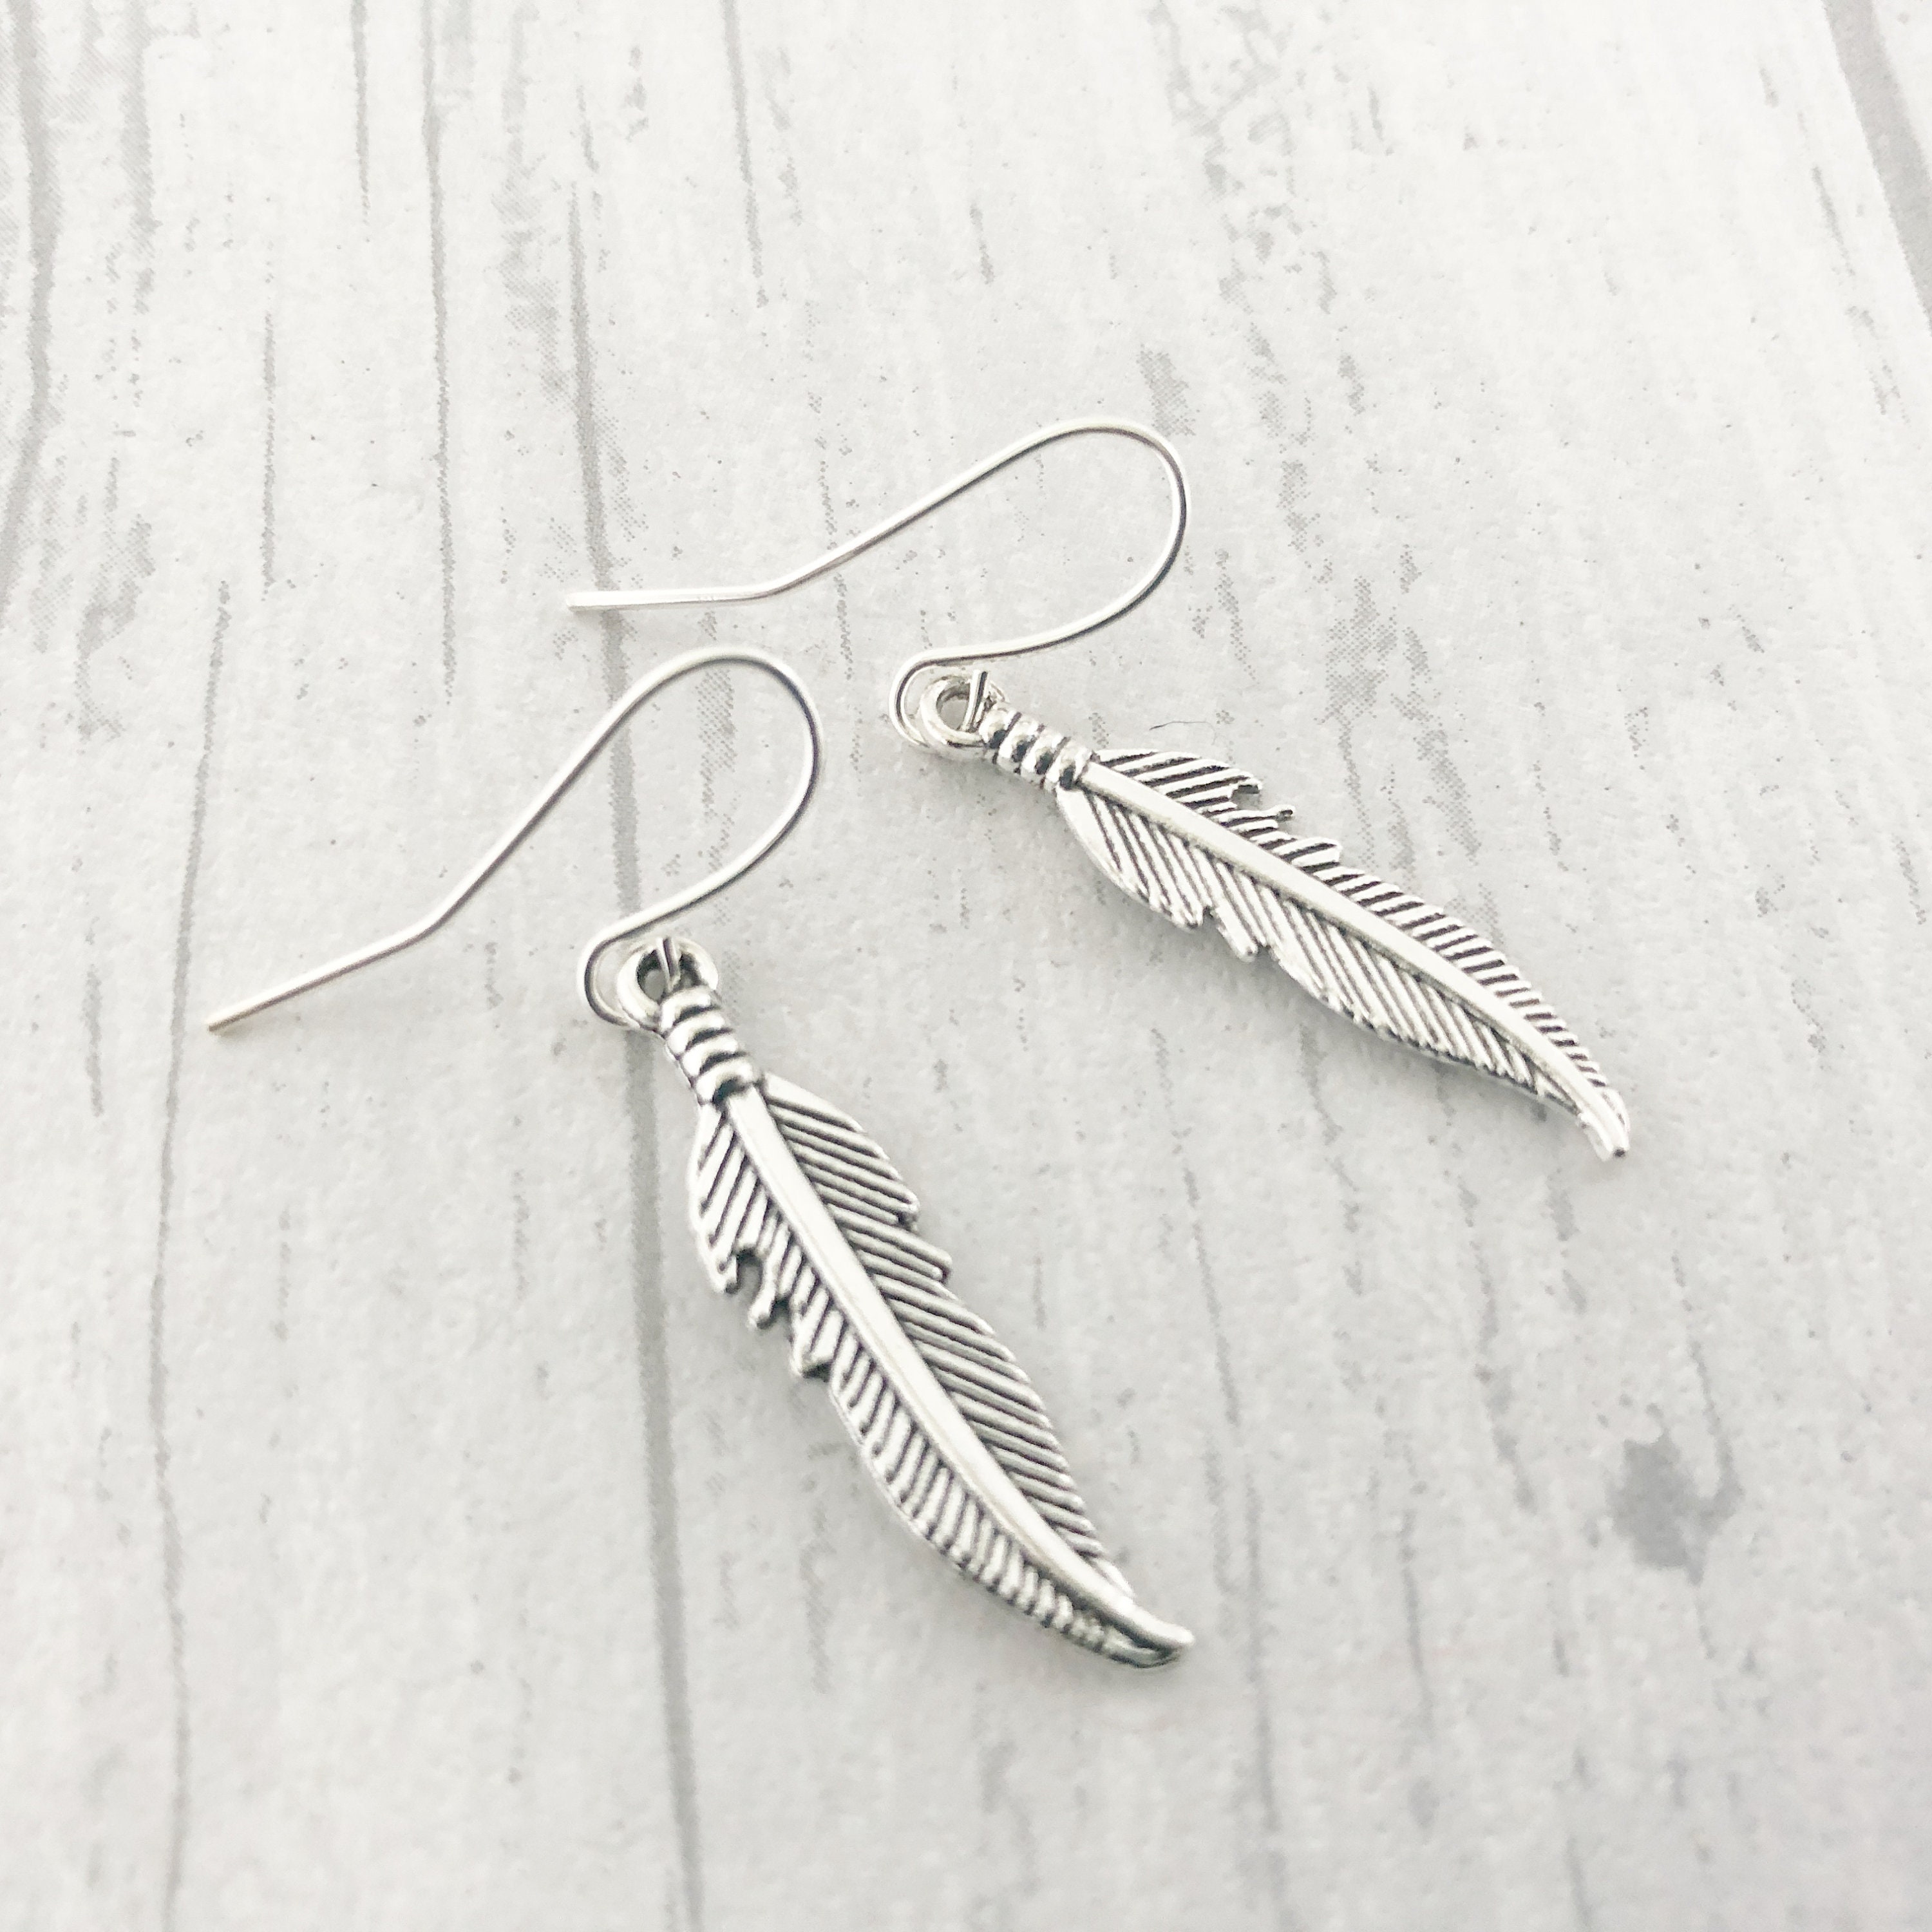 Les Initiés small feathers earrings - 925 Sterling Silver - 30,00 €